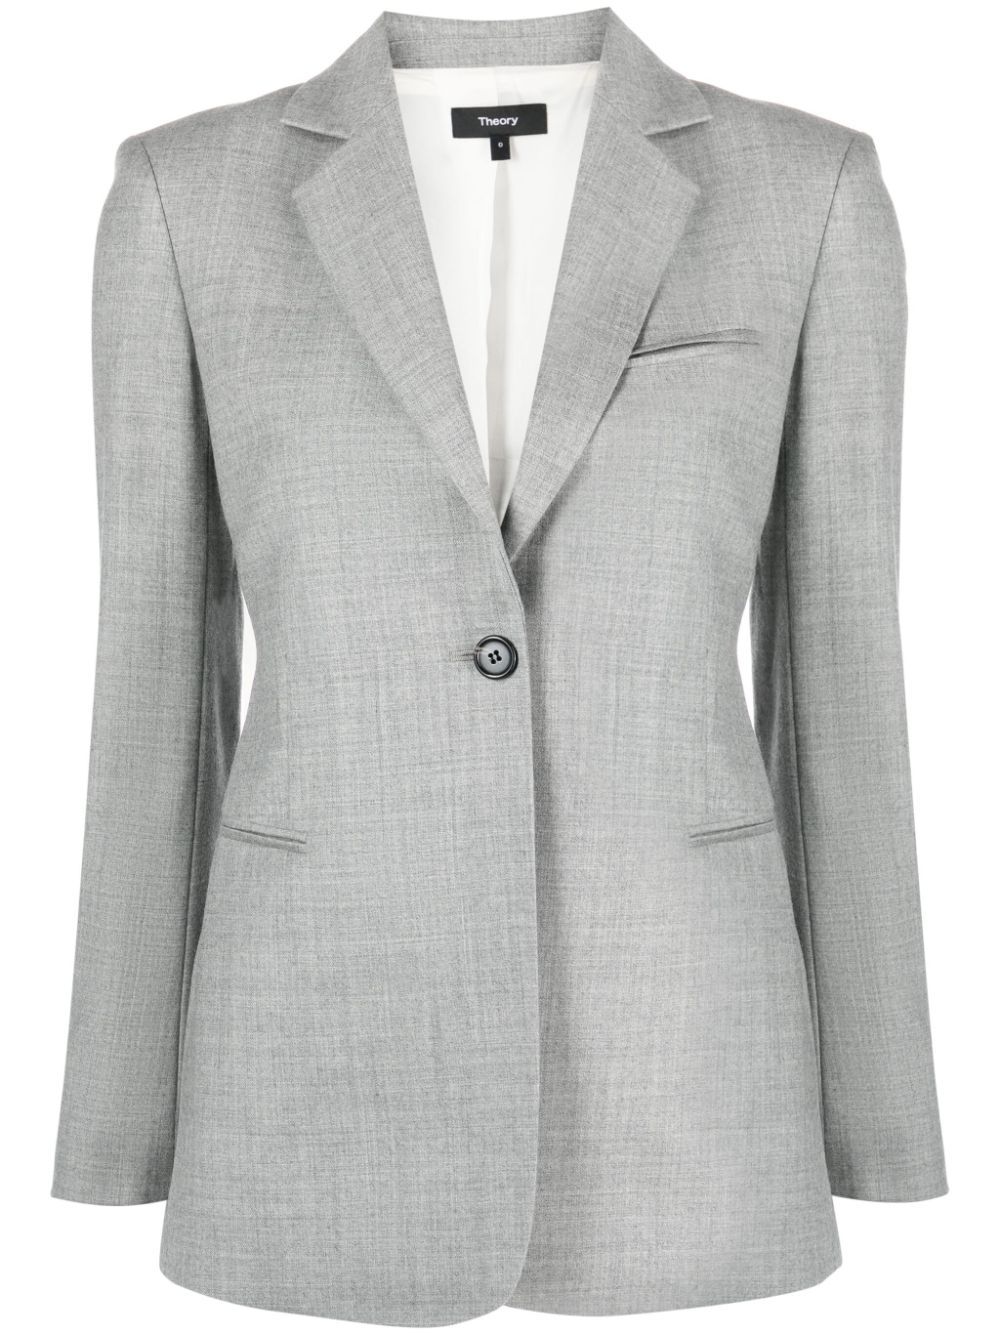 Theory double-breasted virgin wool blazer - Grey von Theory